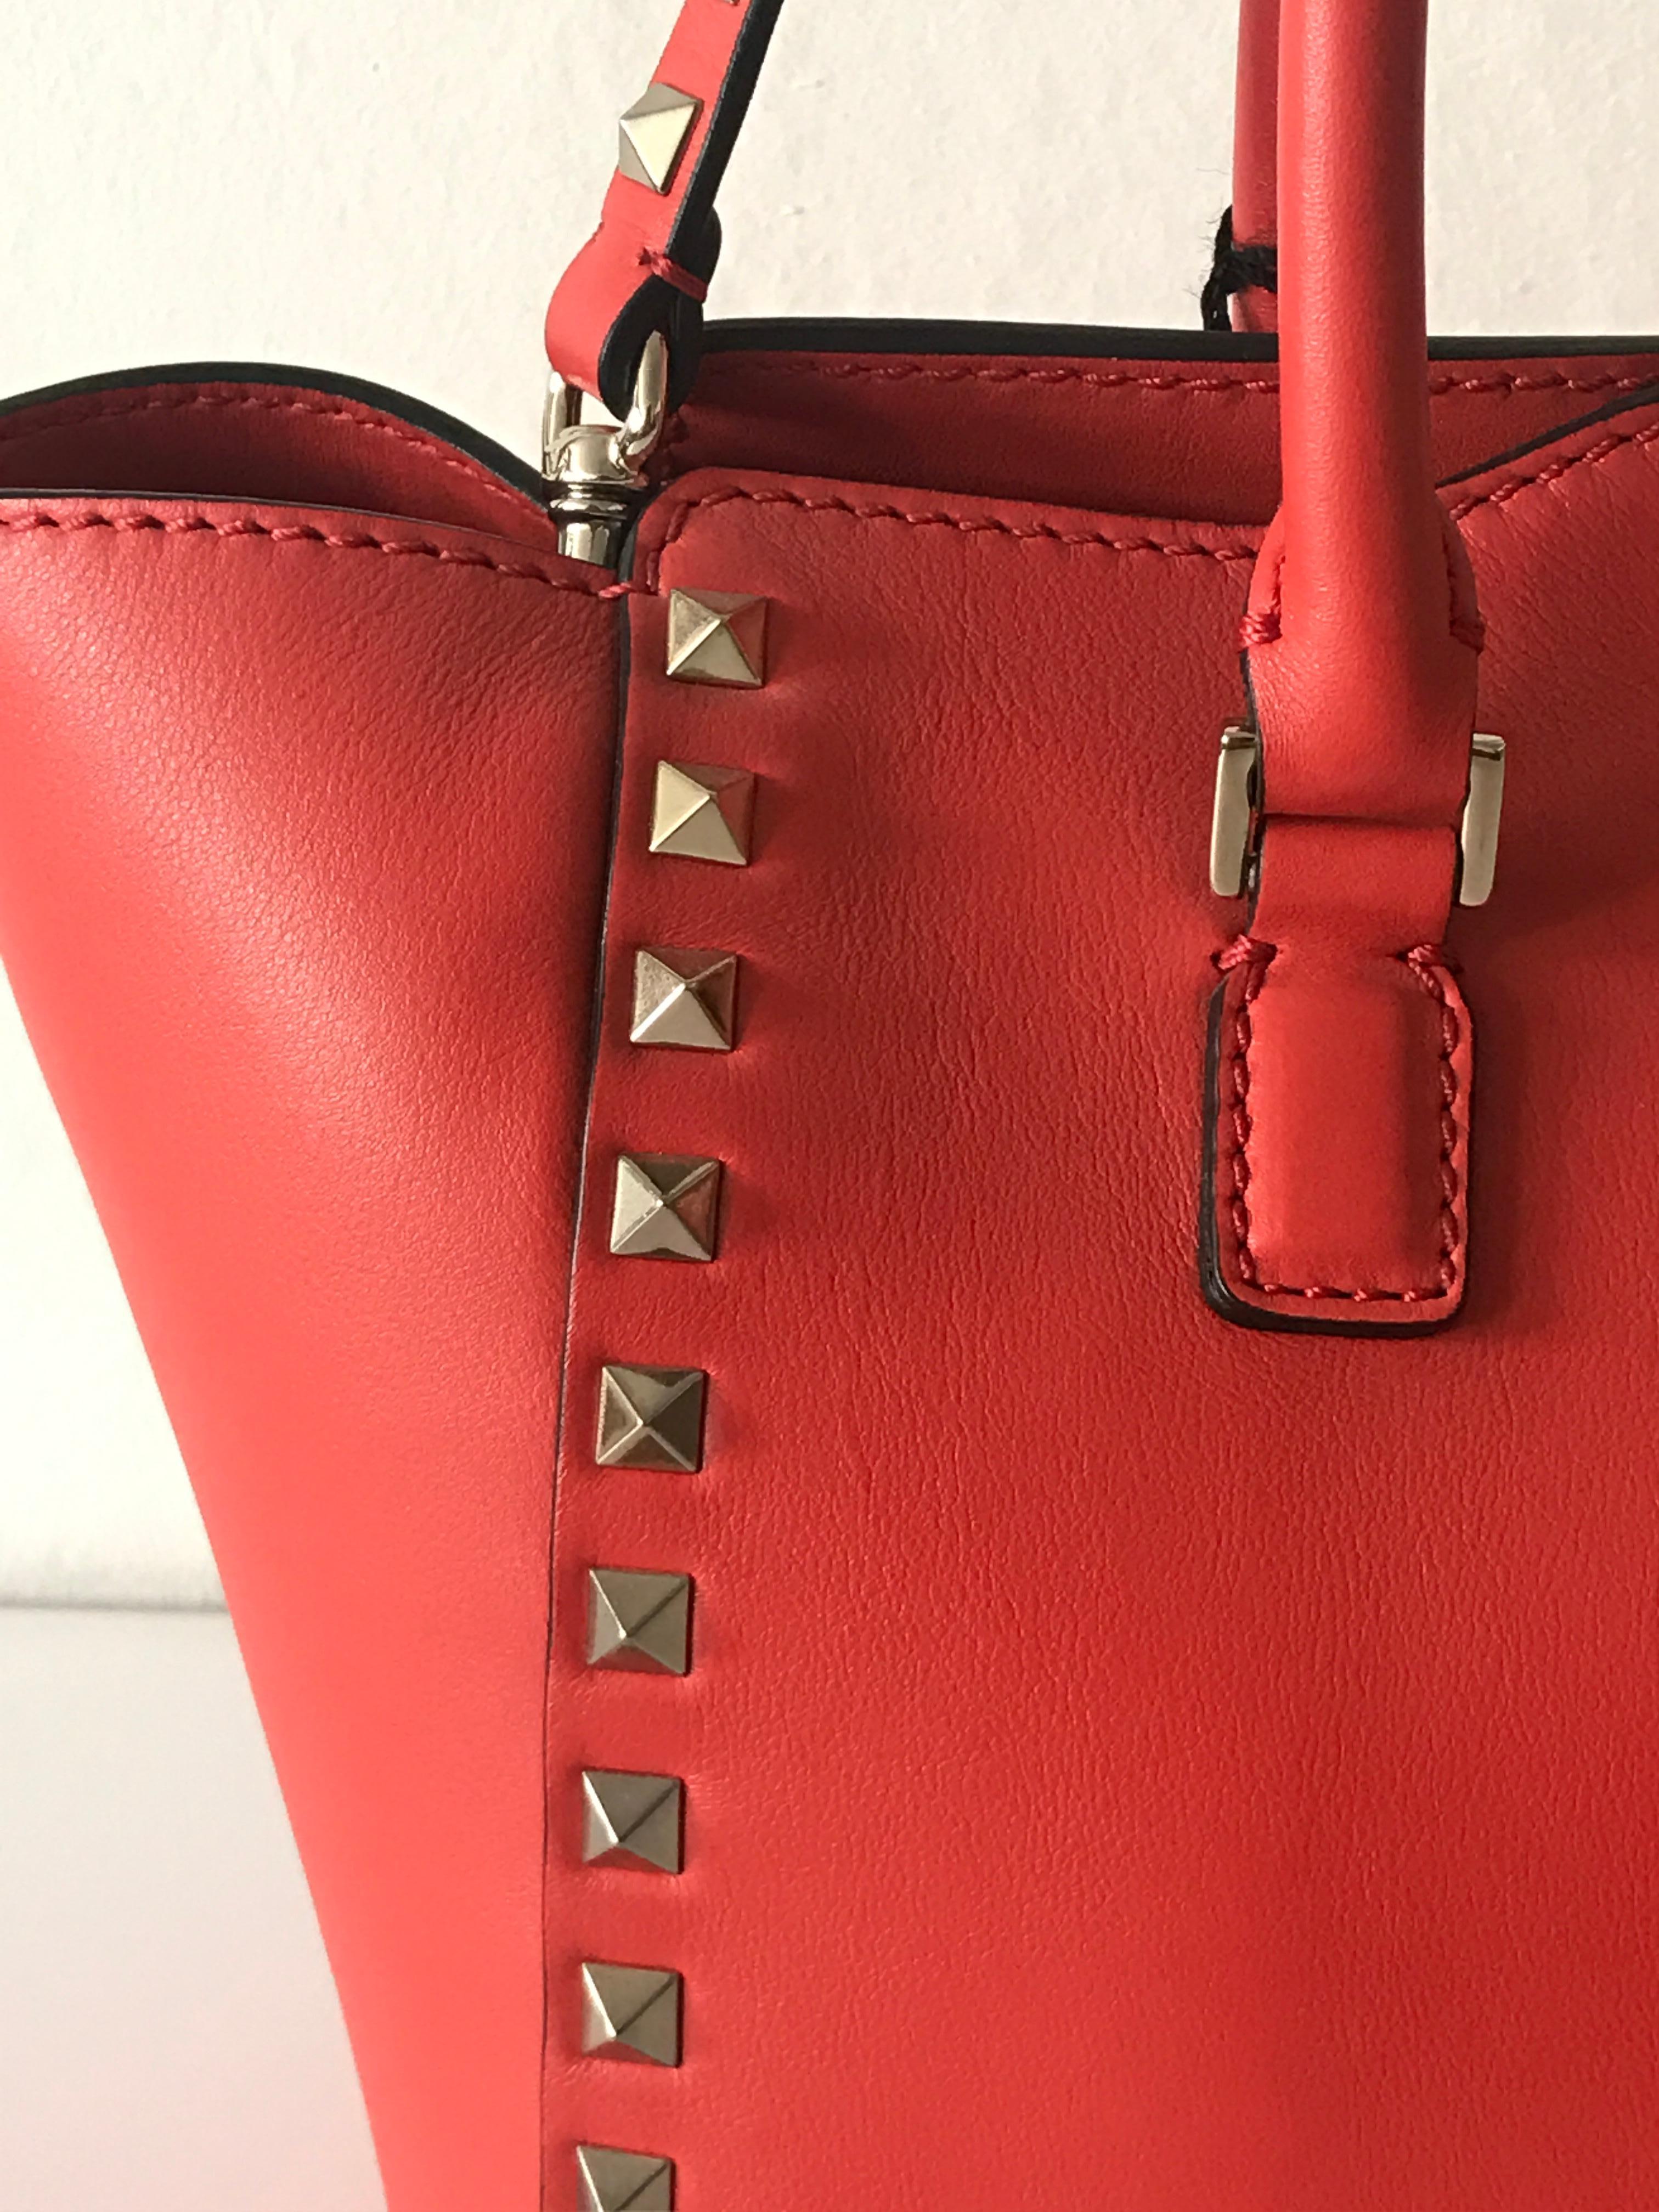 Women's or Men's Valentino small rockstud leather handbag in cherry red 